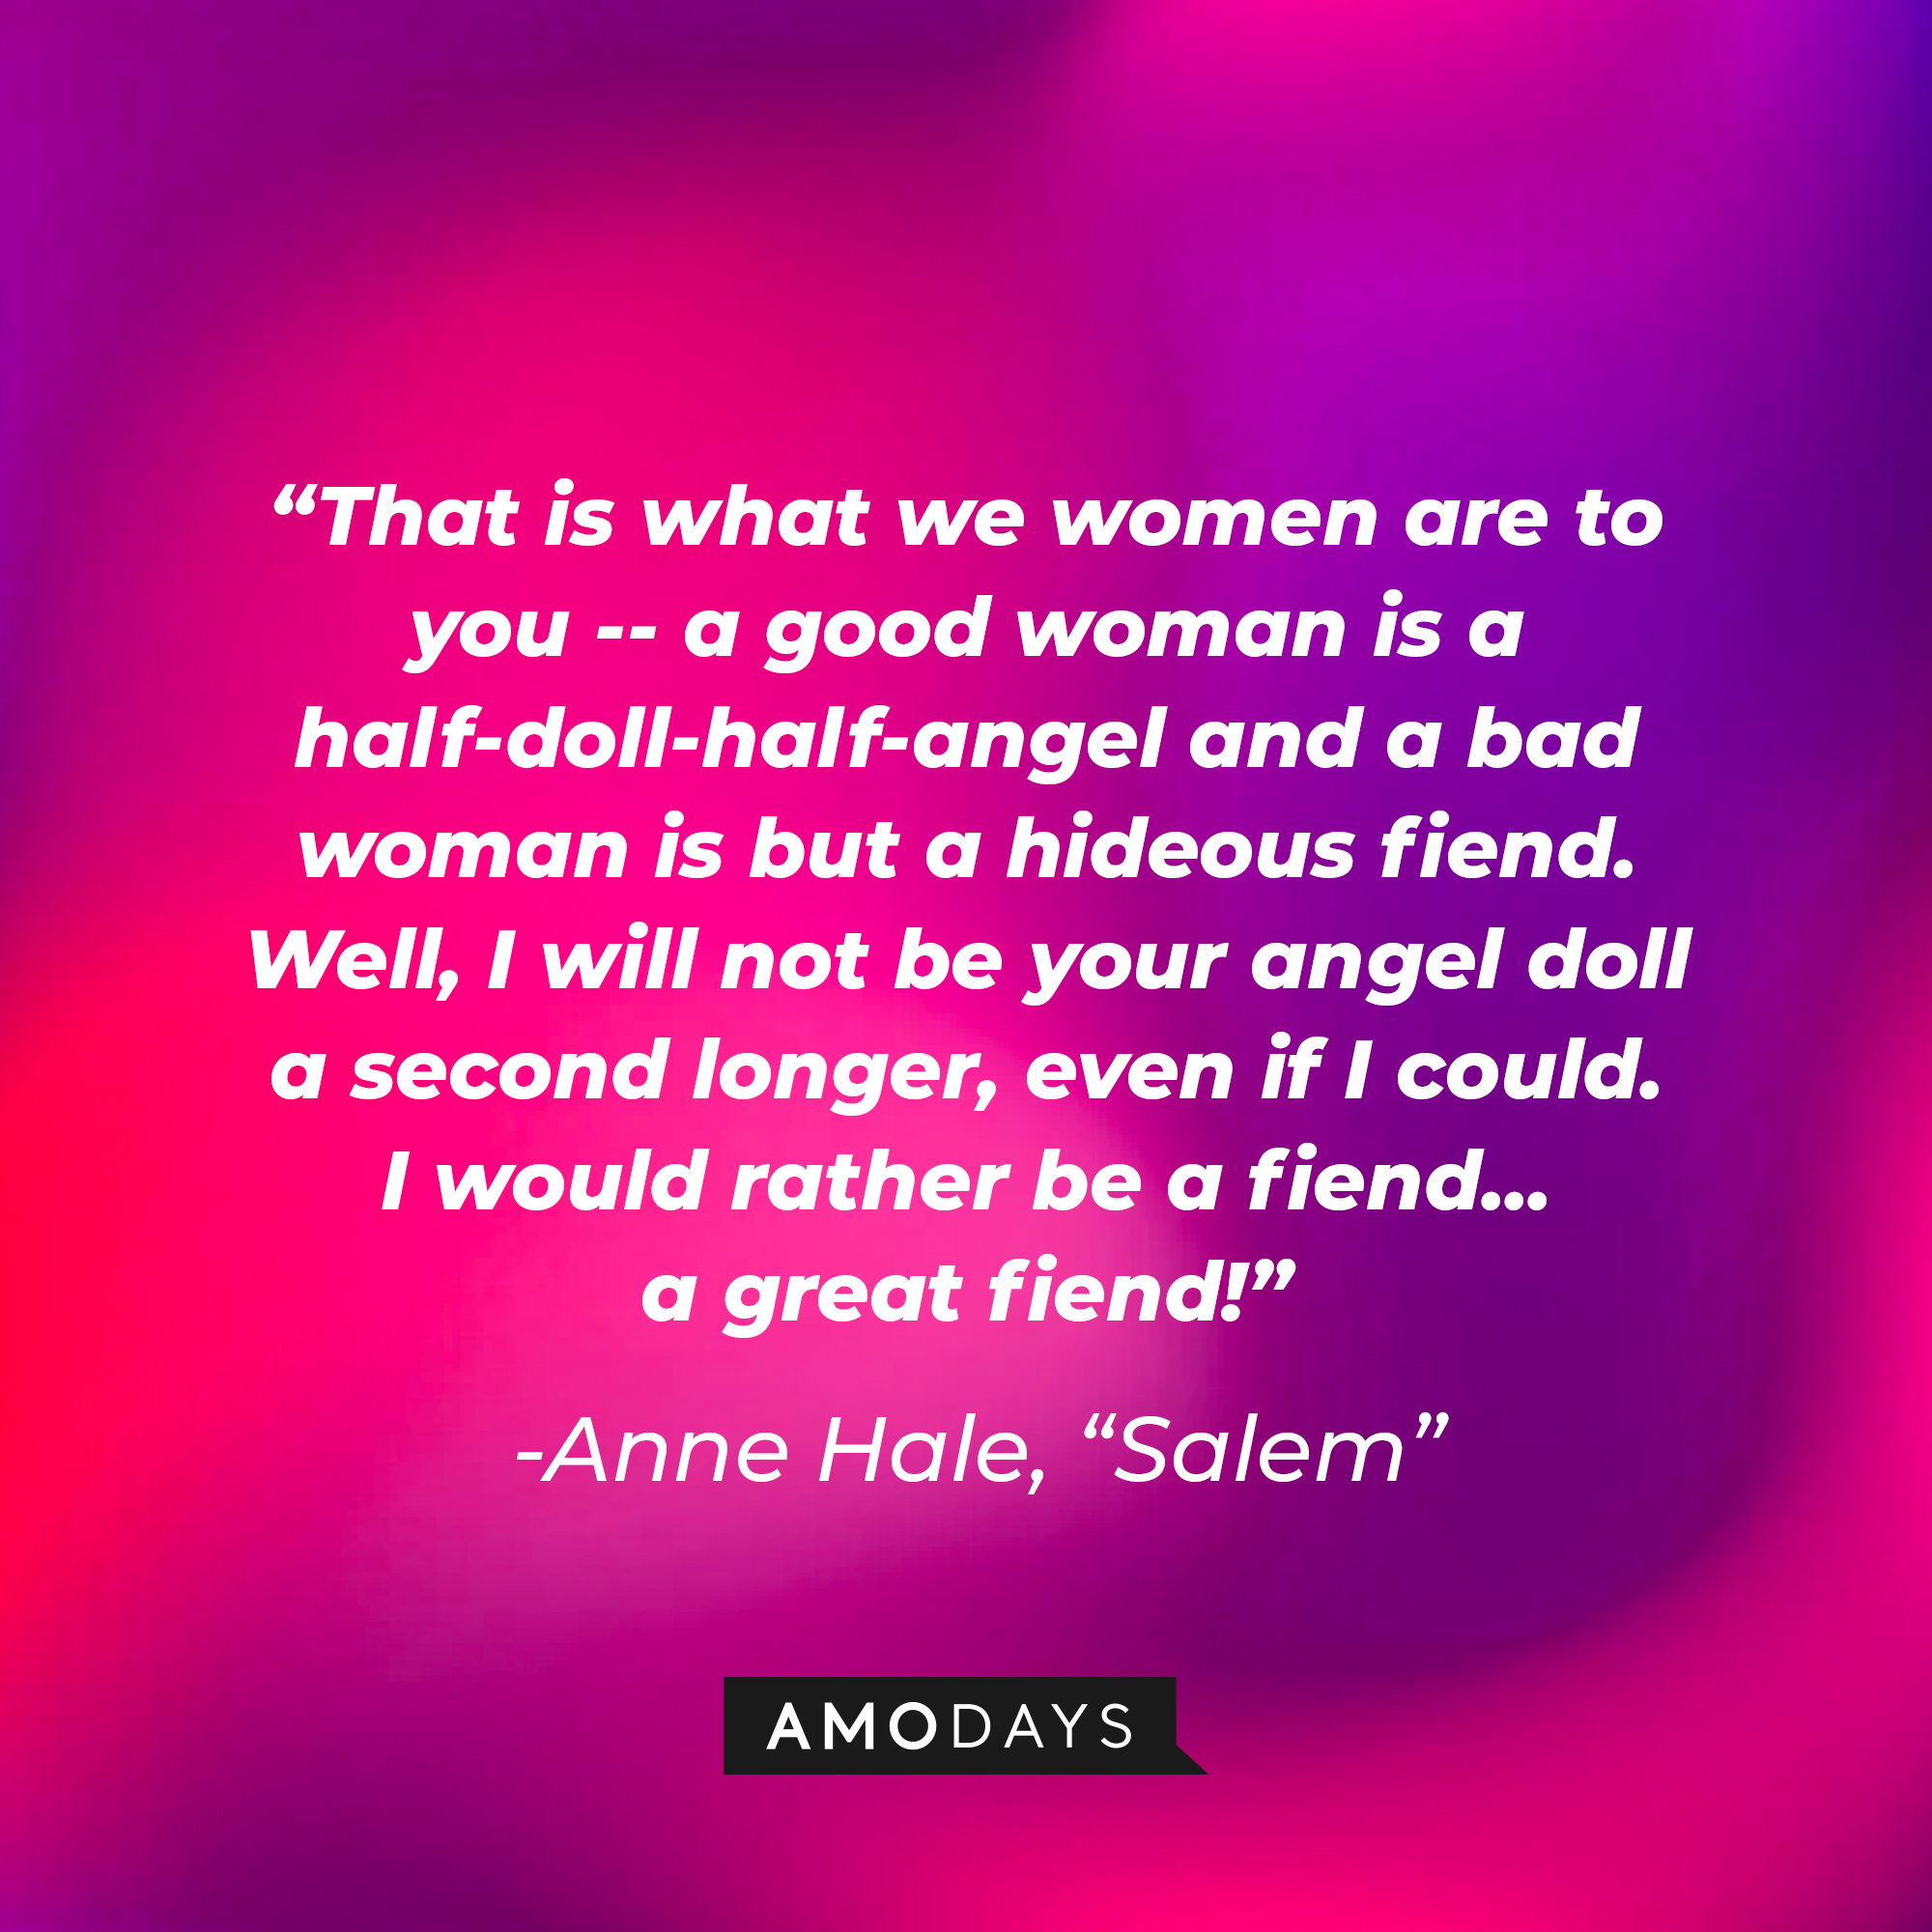 Anne Hale's quote: "That is what we women are to you -- a good woman is a half-doll-half-angel and a bad woman is but a hideous fiend. Well, I will not be your angel doll a second longer, even if I could. I would rather be a fiend...a great fiend!" | Source: Amodays